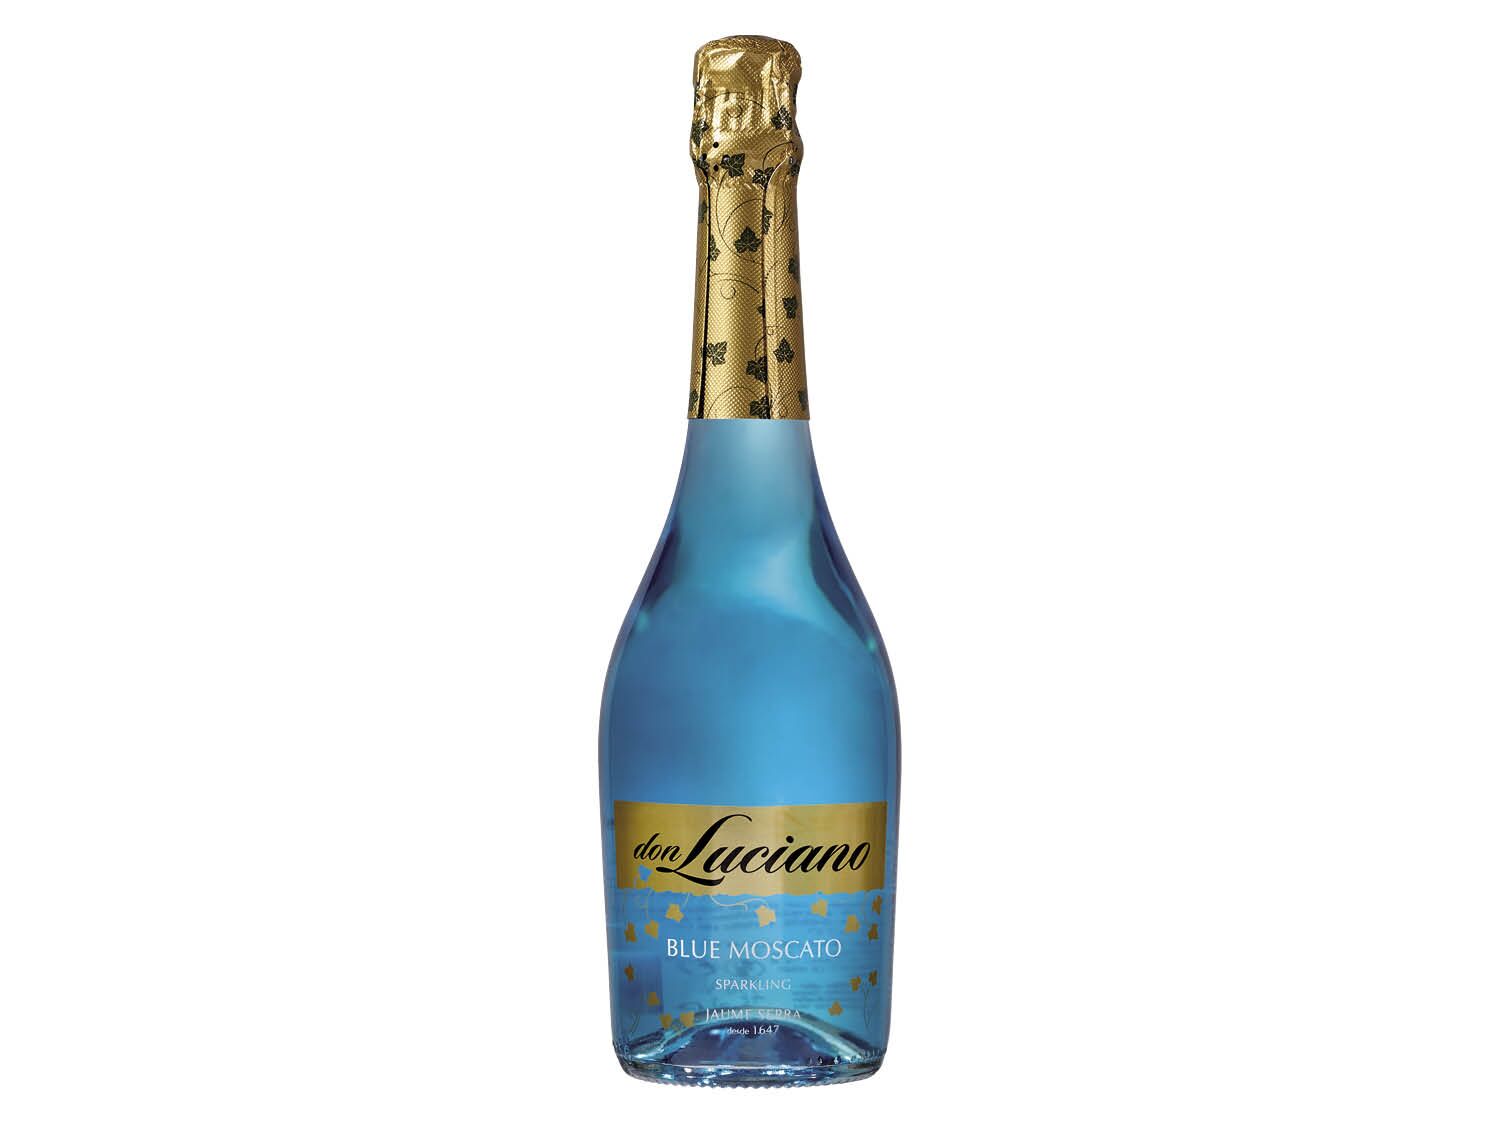 Don Luciano® Blue Moscato